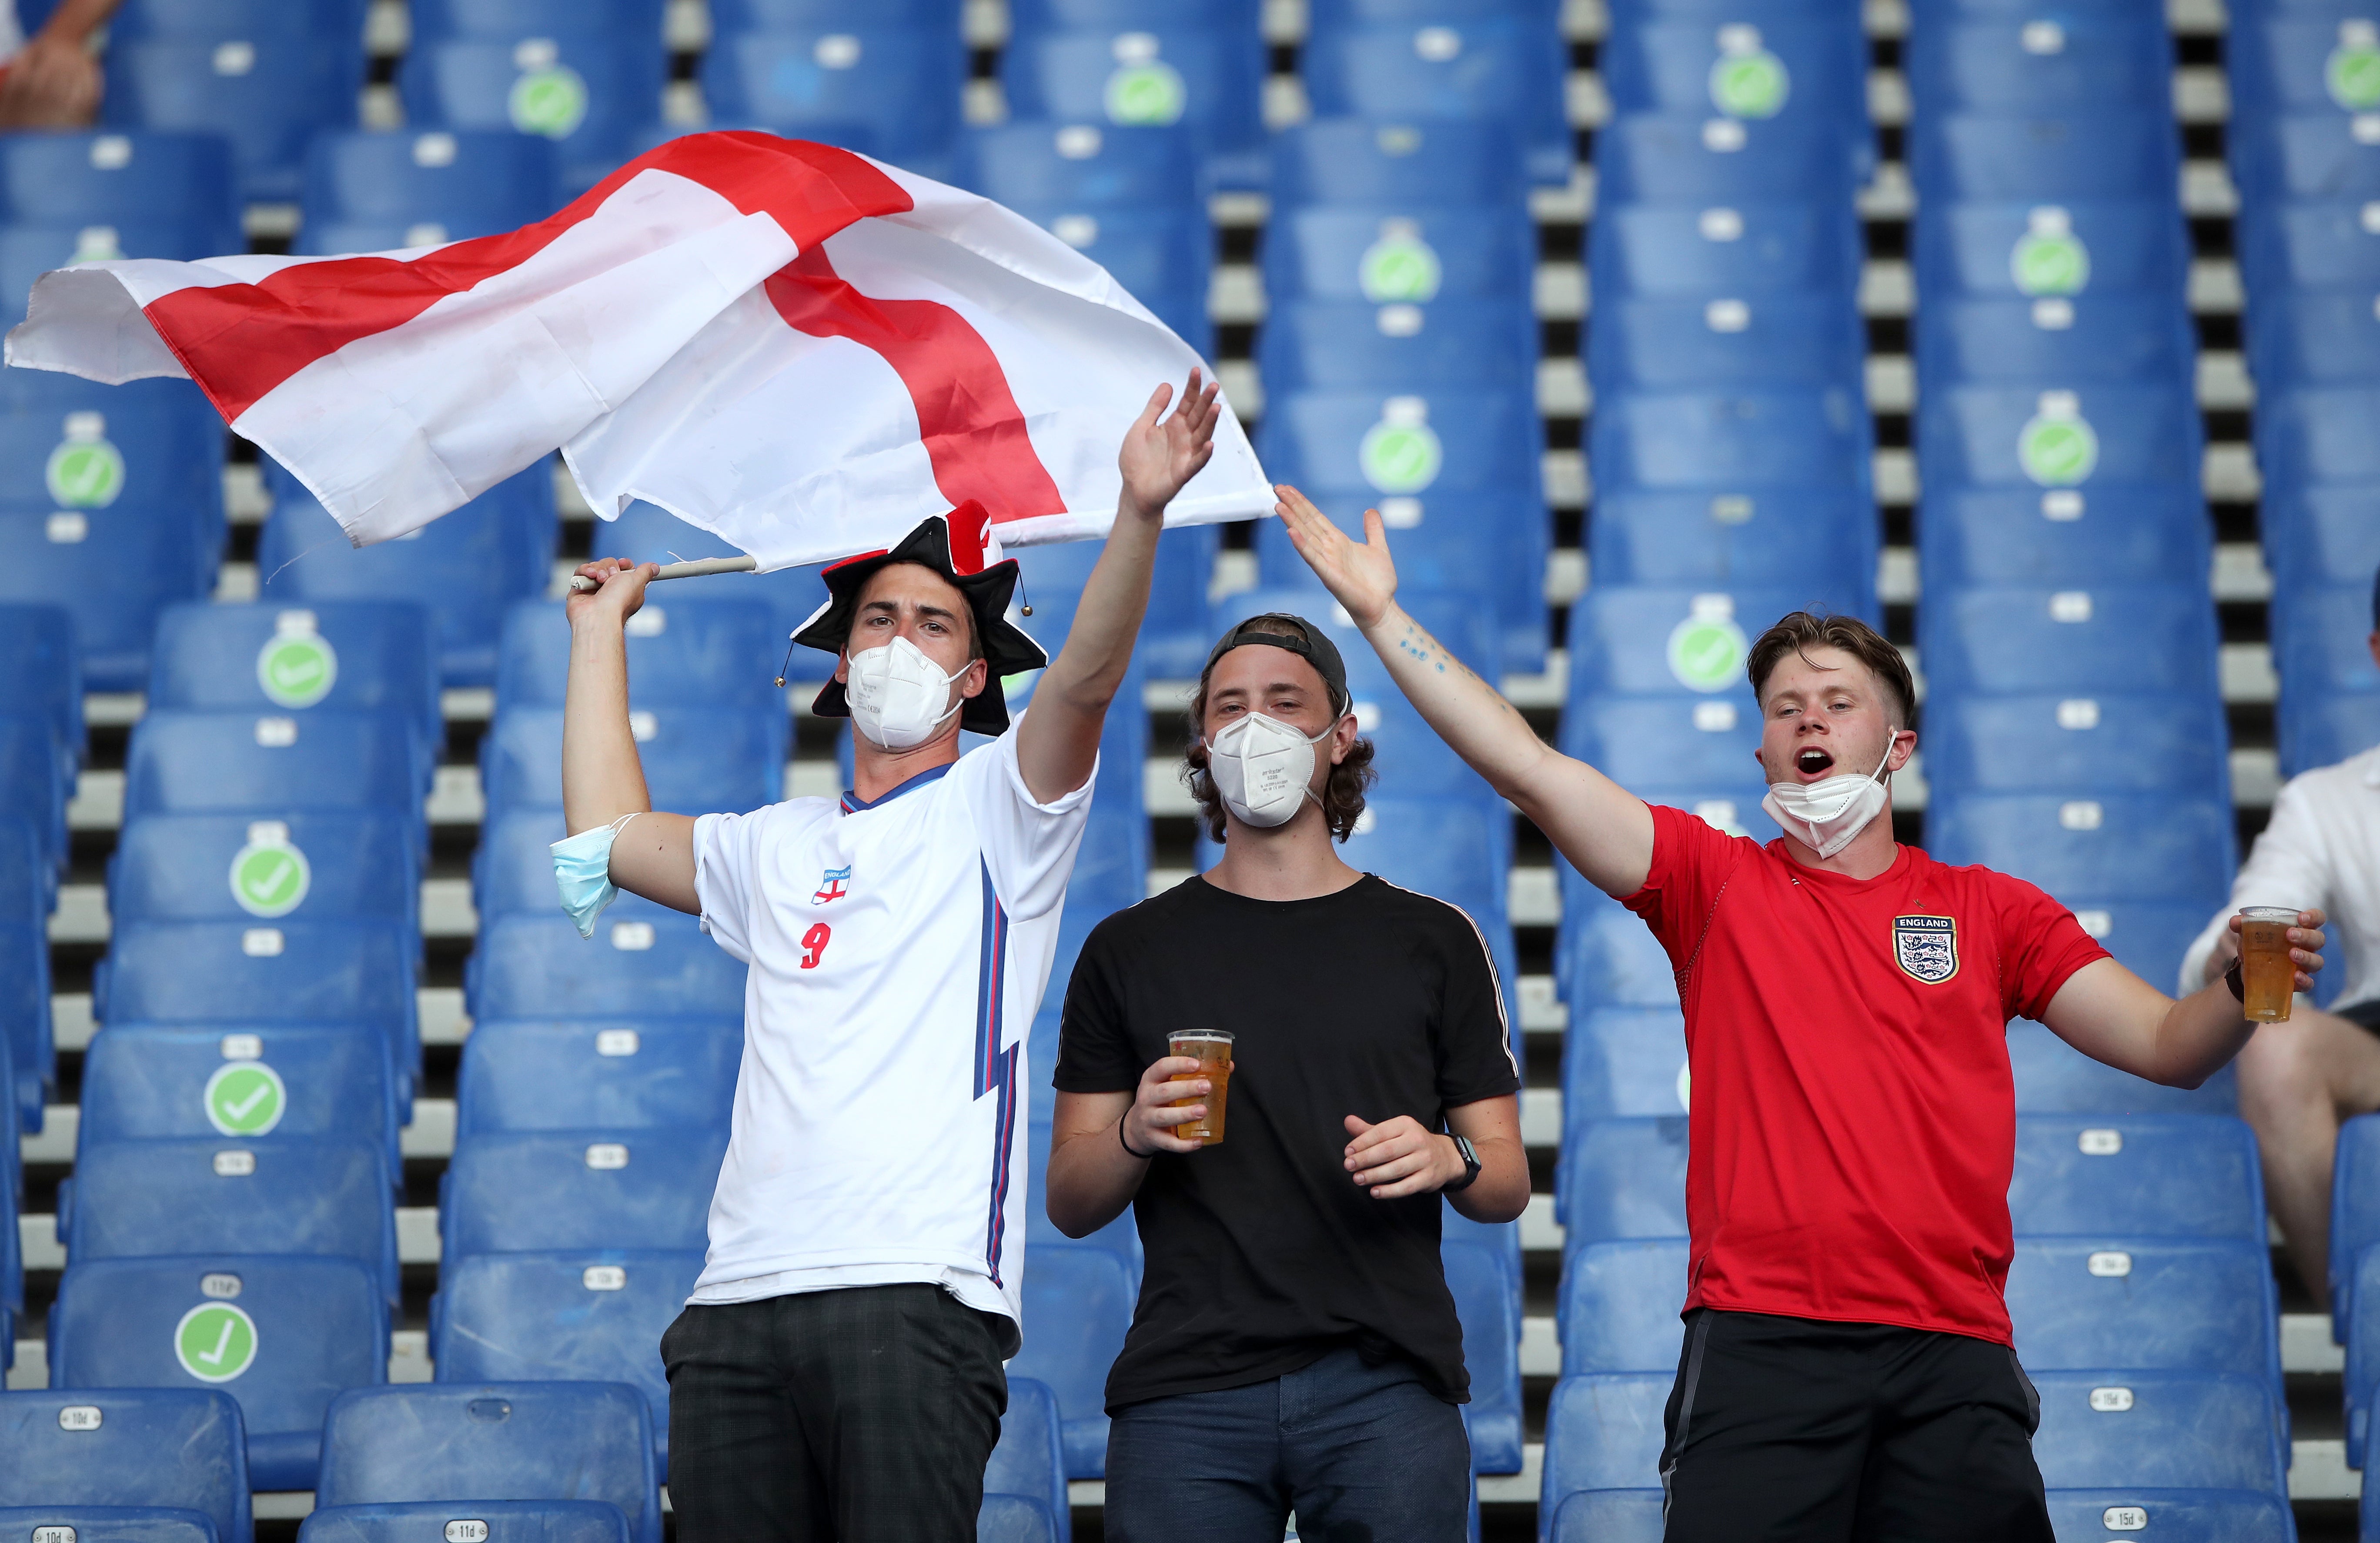 England fans in the stands at the Stadio Olimpico